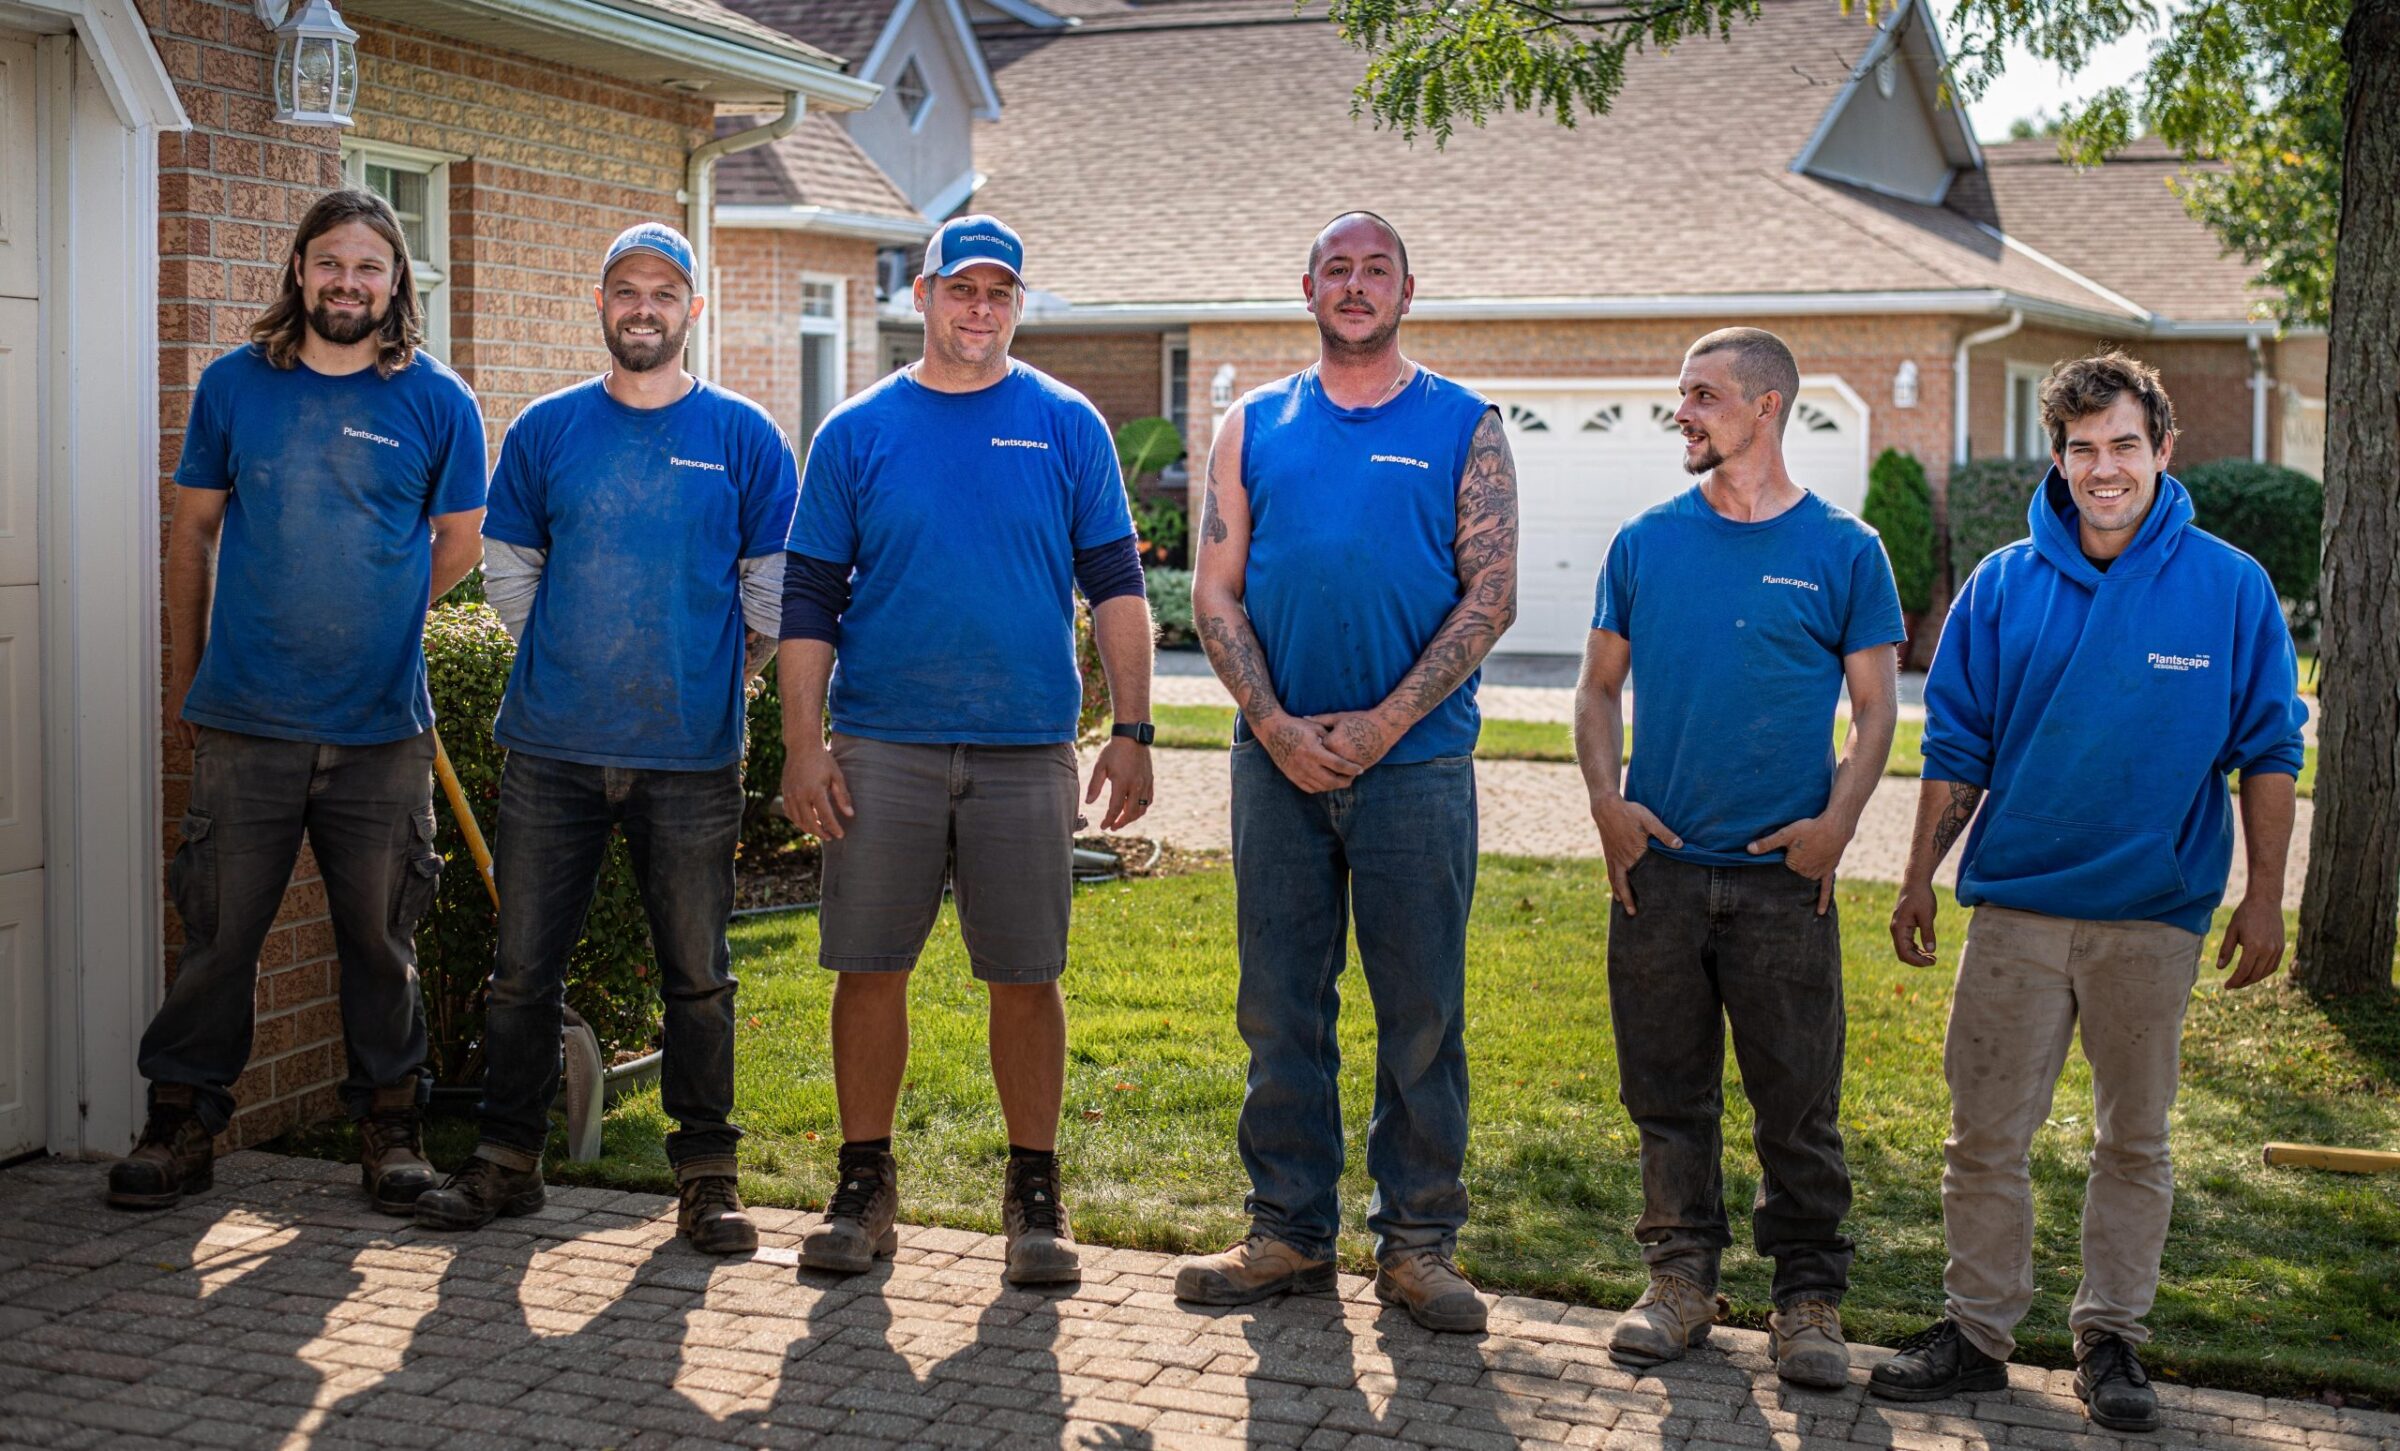 Six people in blue work shirts and jeans stand smiling in front of a residential house, with greenery and sunlight casting shadows on a driveway.